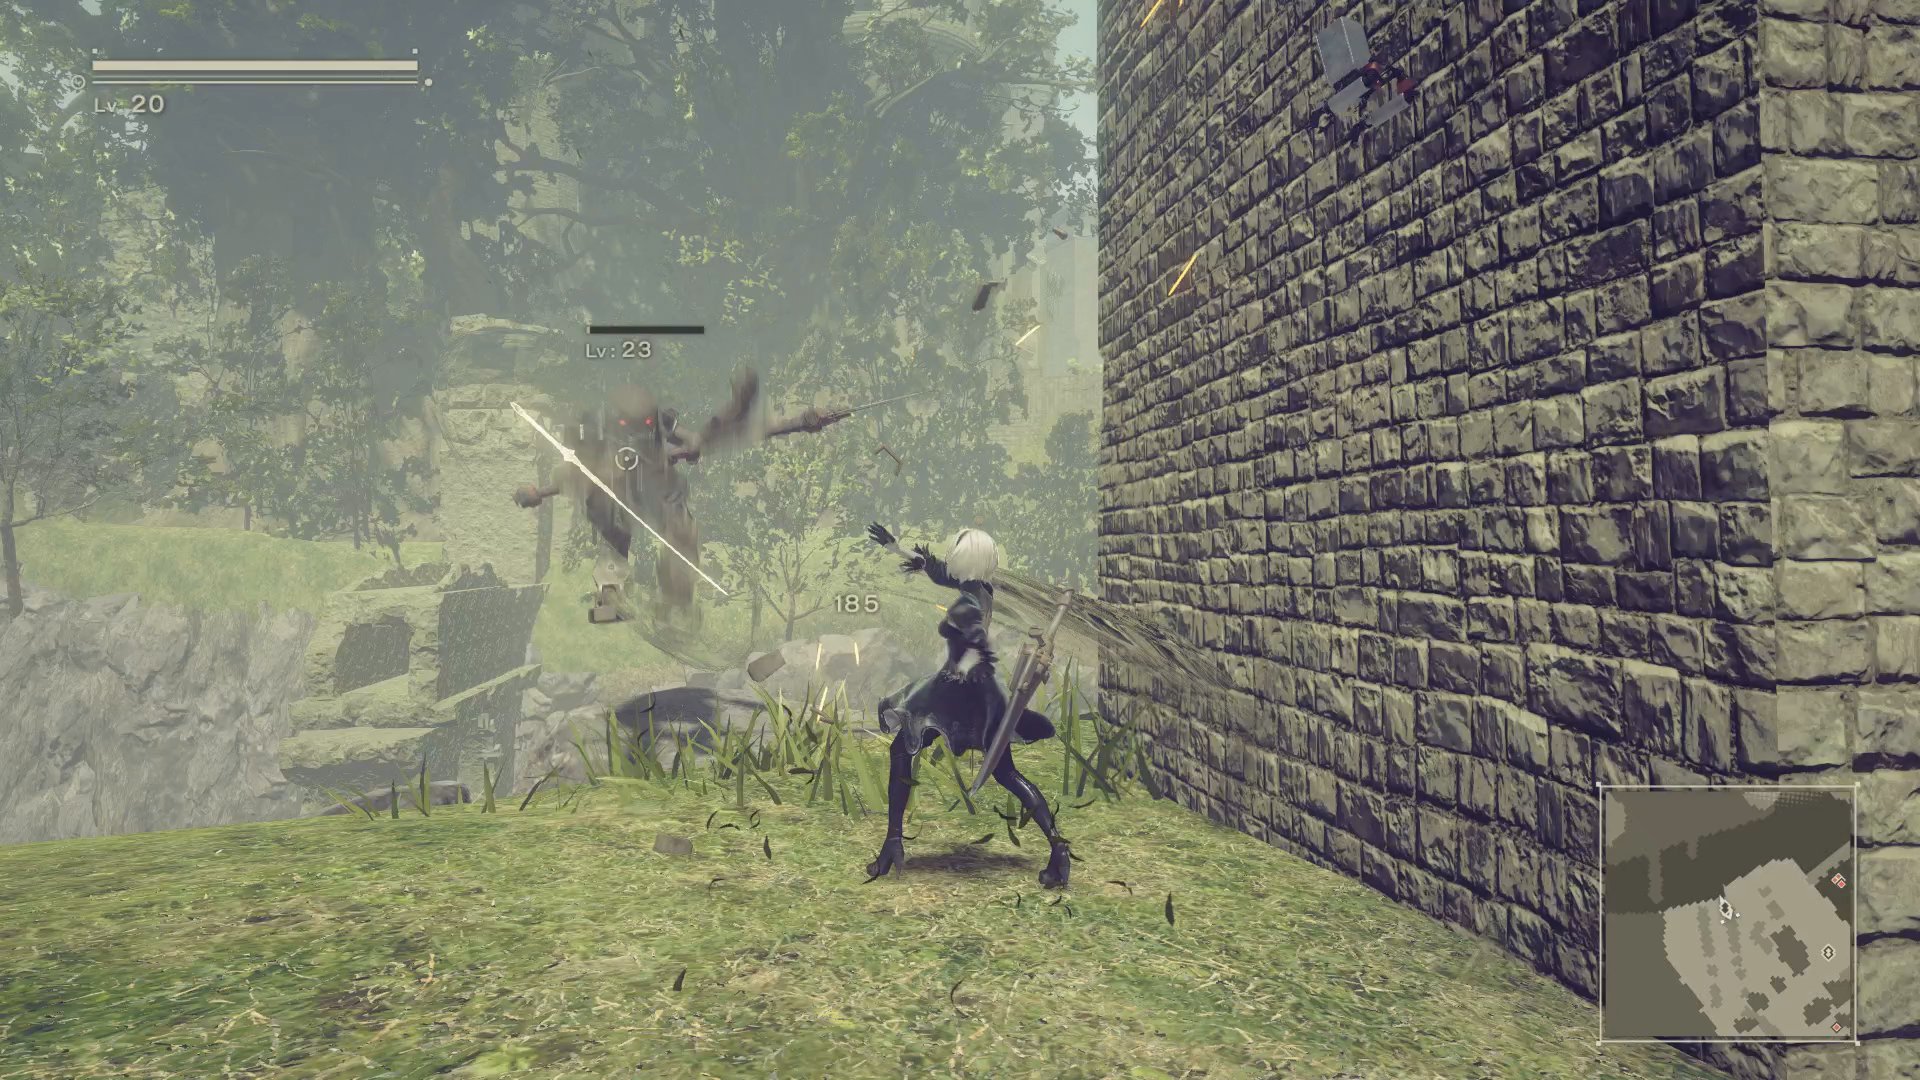 volwassene Ontmoedigd zijn Wijde selectie kirachem on Twitter: "NieR: Automata PS5 Backwards Compatibility Gameplay  Performance Test at Forest Kingdom Video: https://t.co/UXwr0mMkUb # NieRAutomata #2B #9S #A2 #PS4 #PS4Pro #PS4share #PlayStation5 #PS5  #PS5share #waifu #waifuwednesday #gameplay ...